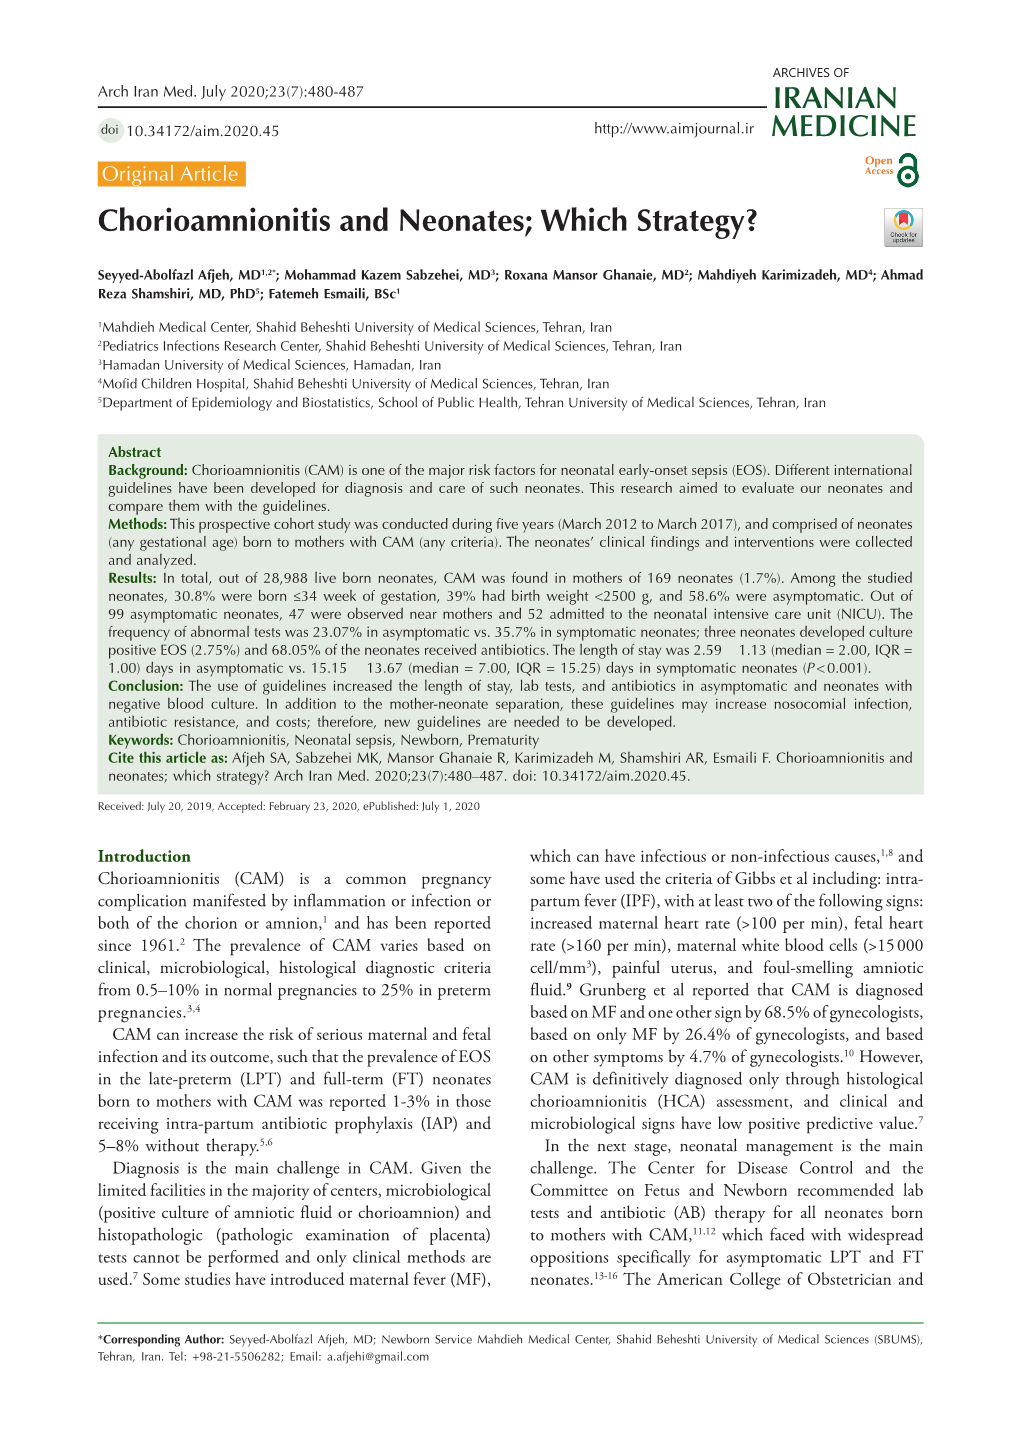 Chorioamnionitis and Neonates; Which Strategy?